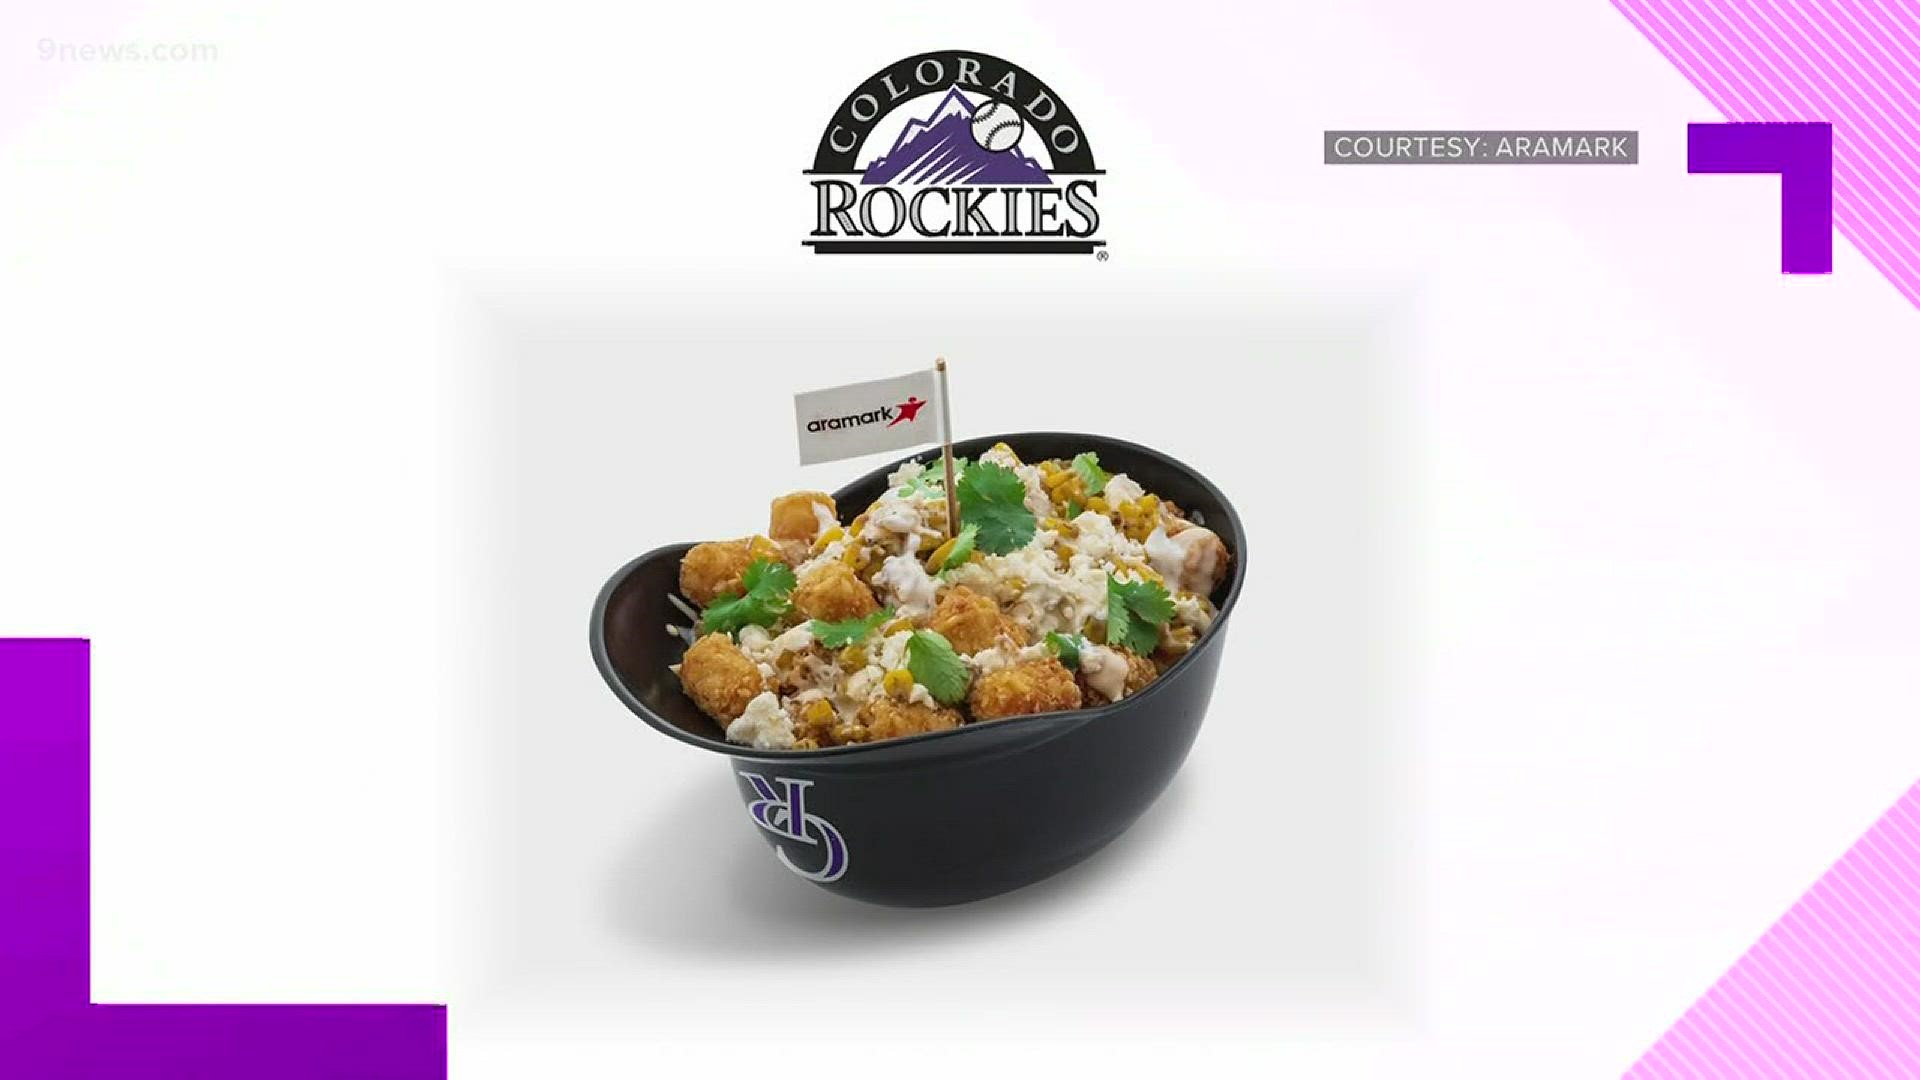 Aramark, the food and facilities management company that partners with the Colorado Rockies, introduced the items ahead of Opening Day.